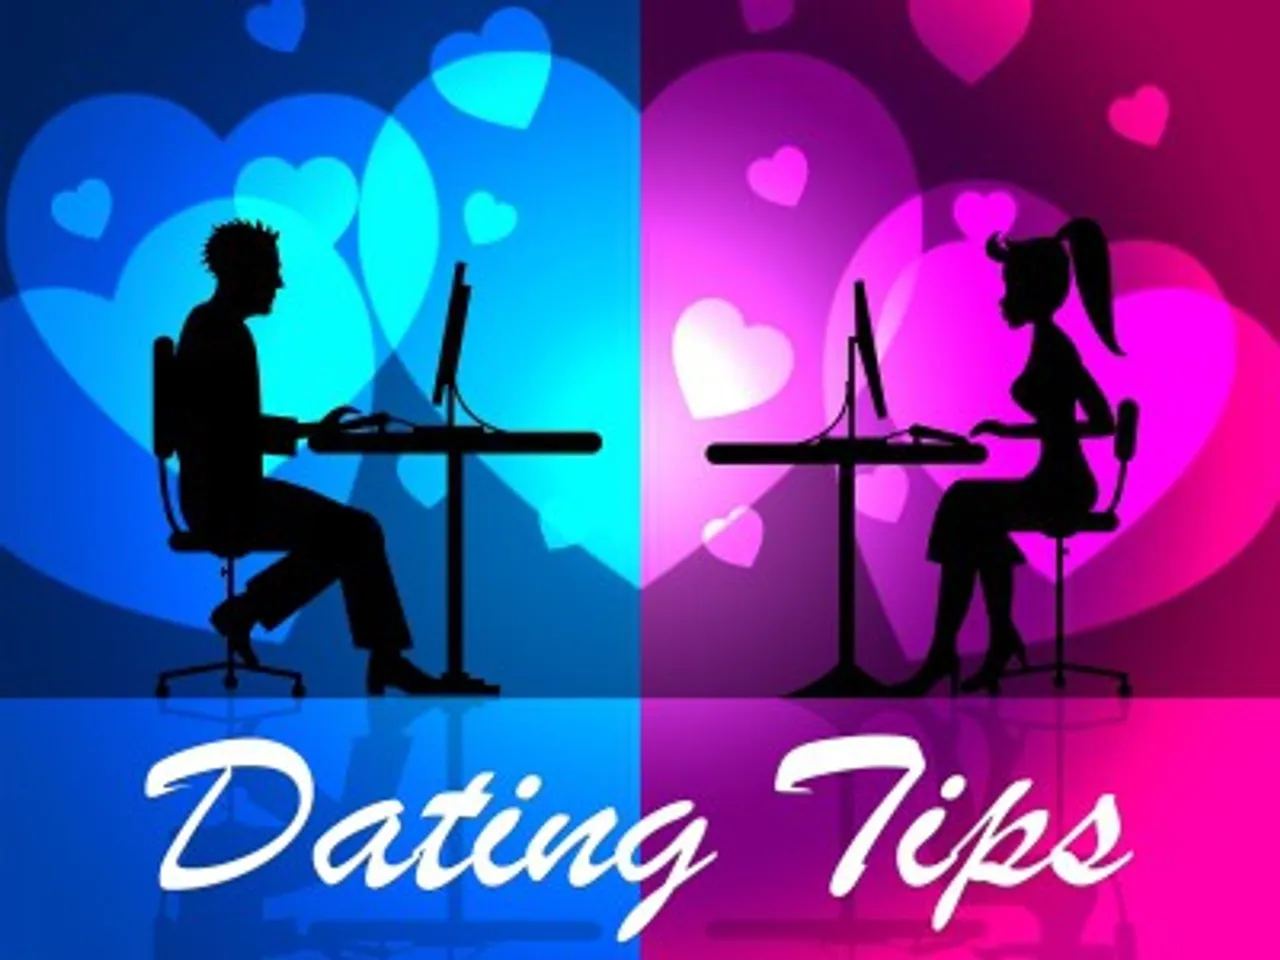 Valentine's Day: Don't fall prey to online dating scams